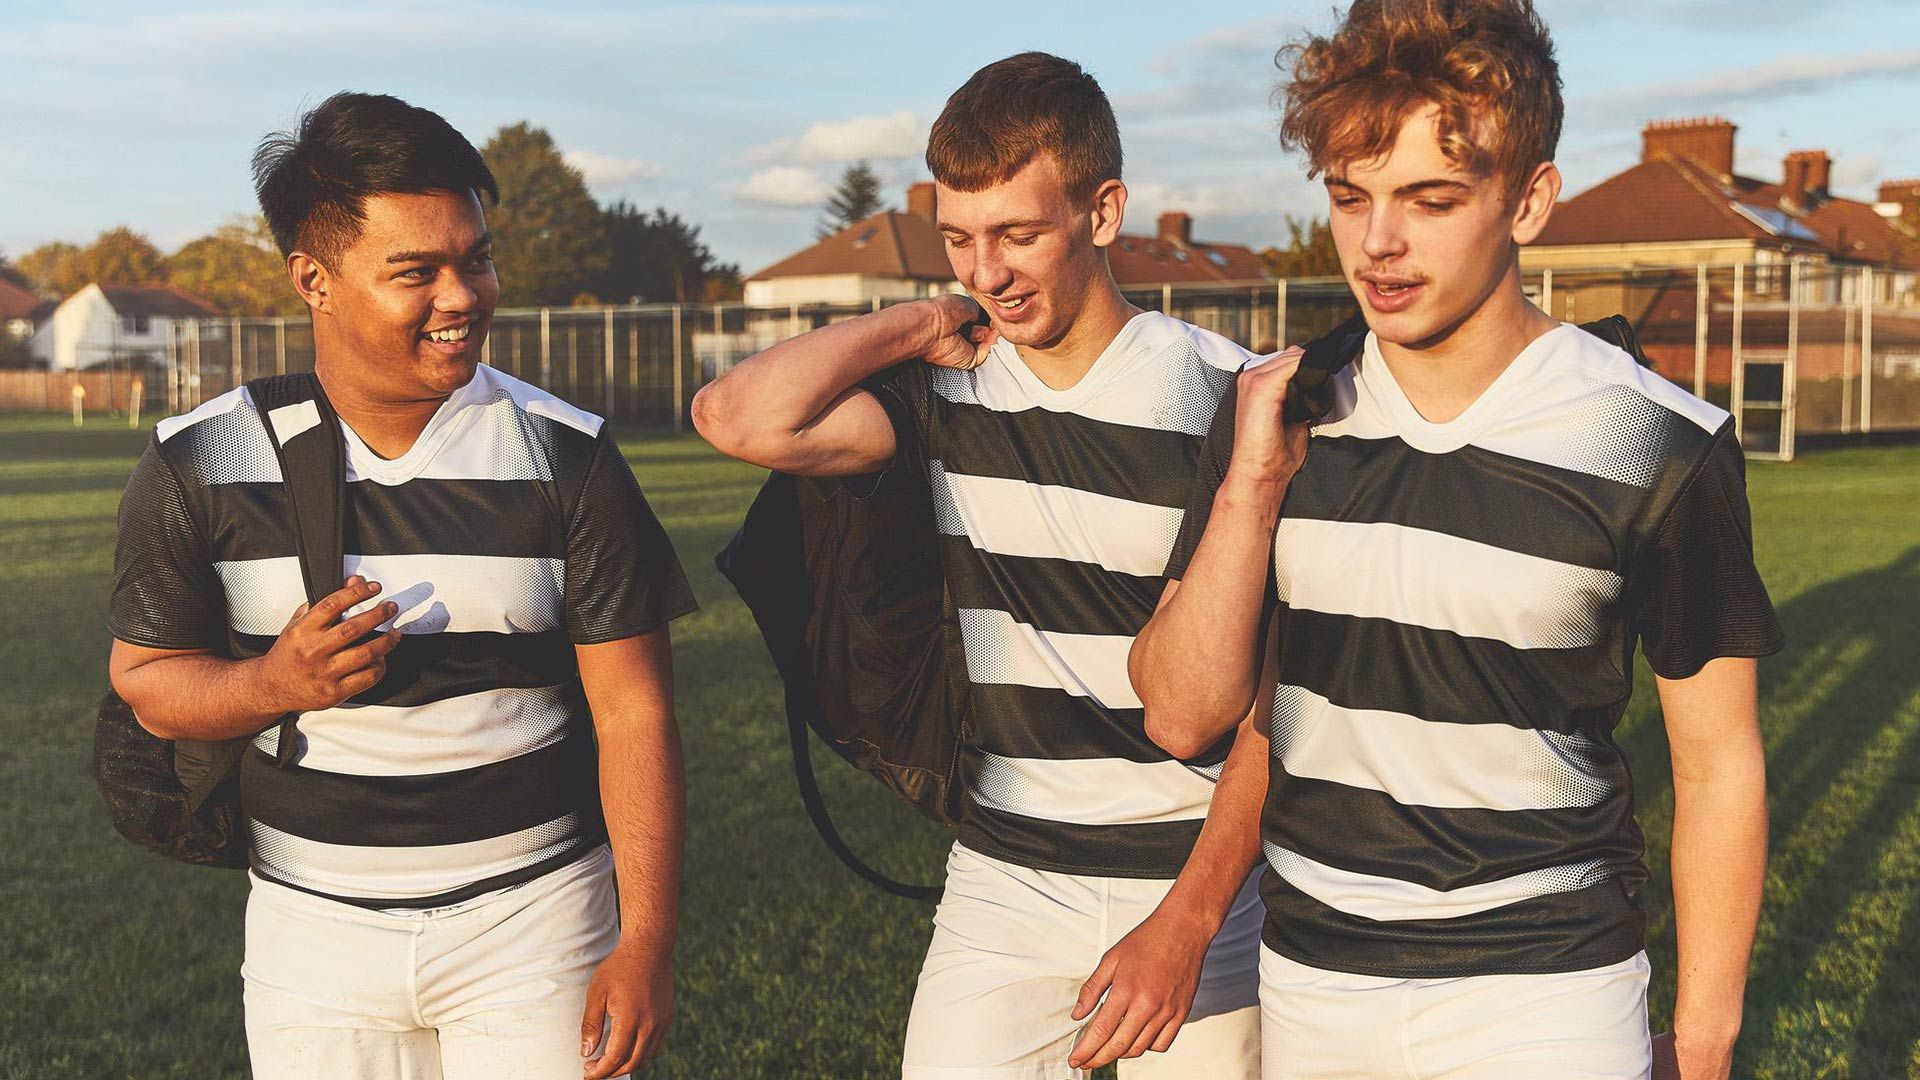 Young men in striped rugby sport attire chatting on a field after a game.